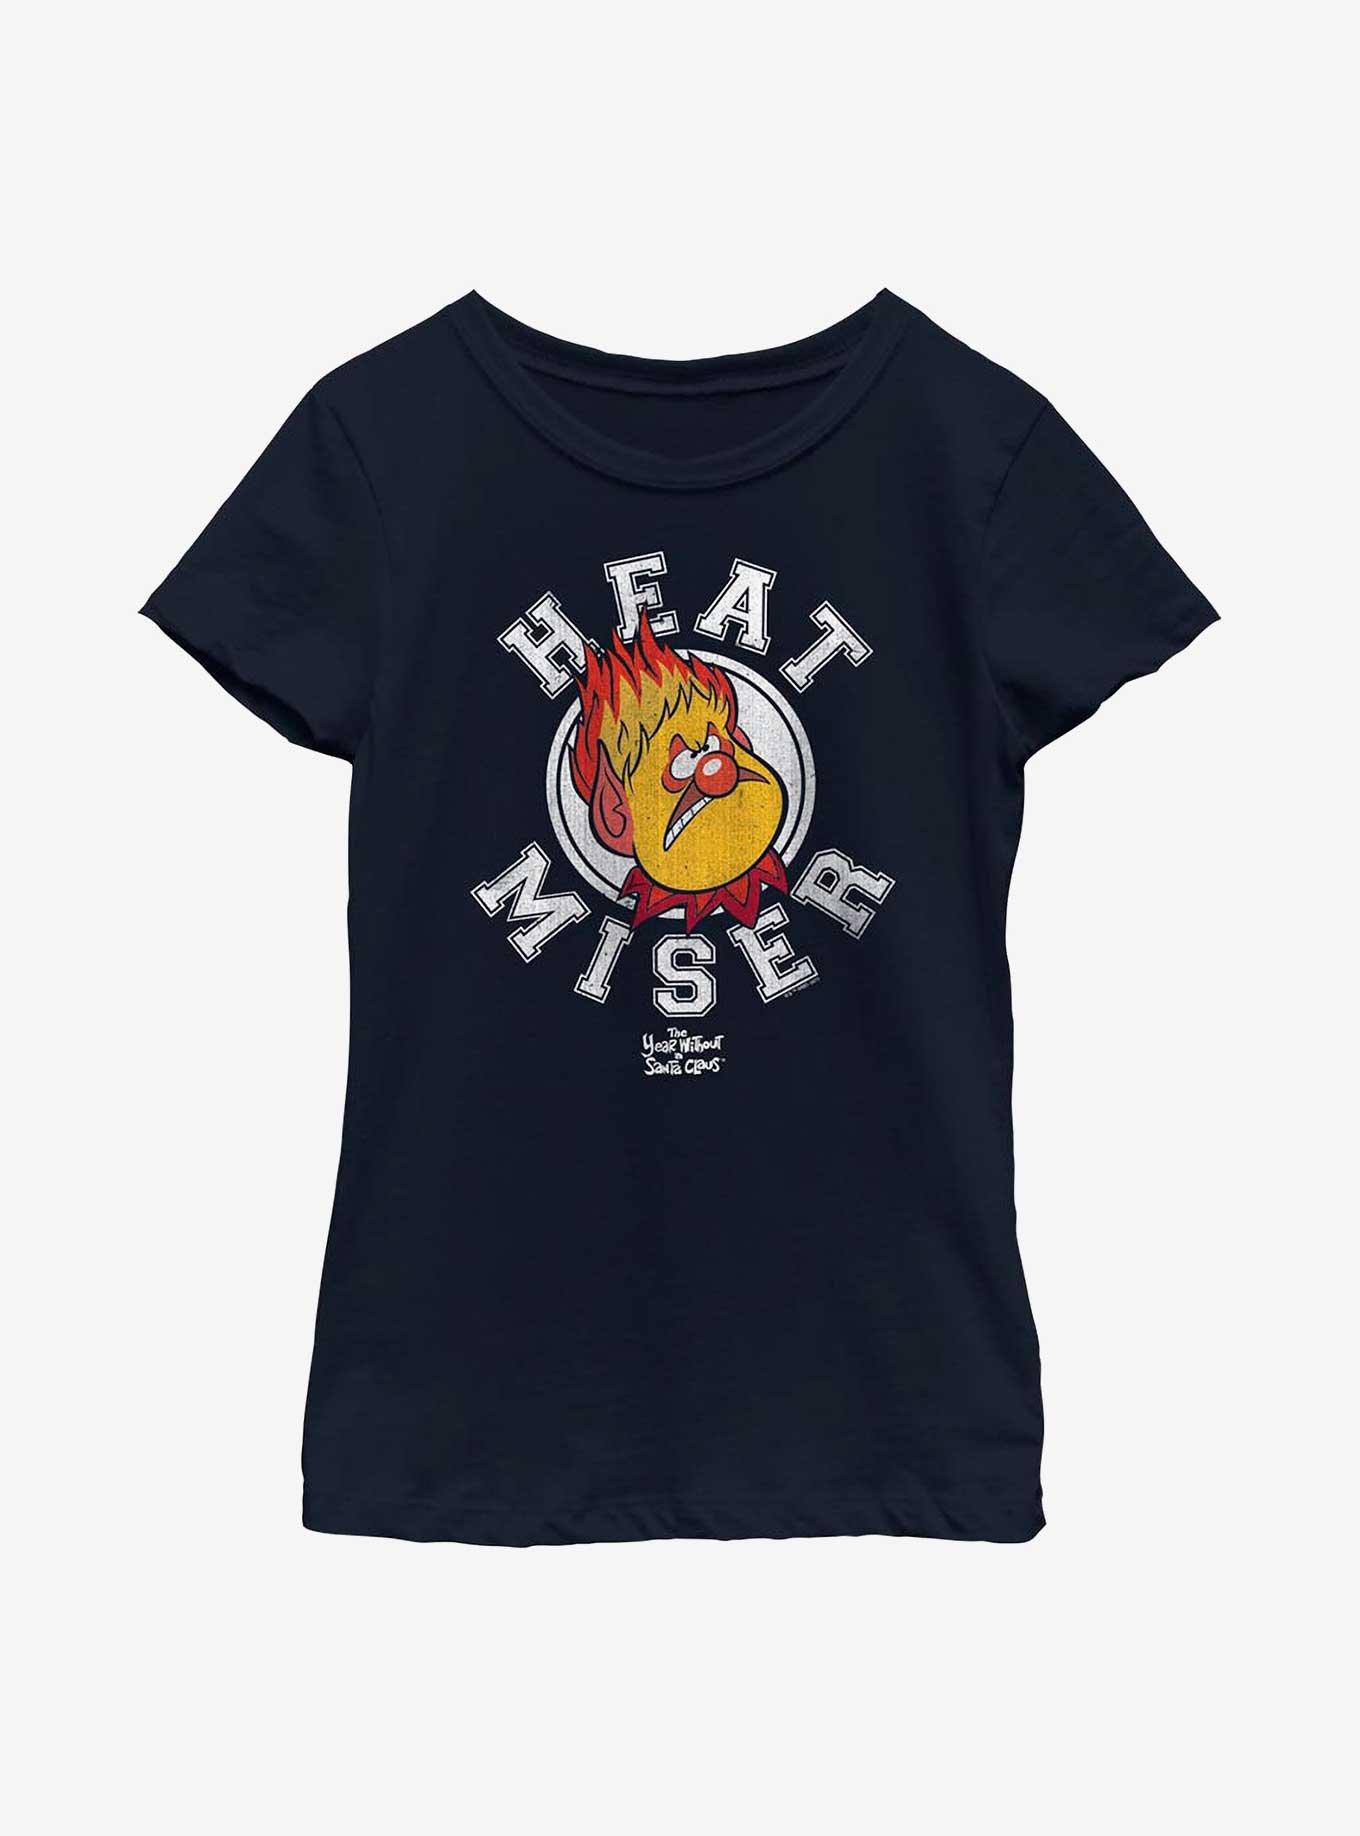 The Year Without Santa Claus Heat Miser Collegiate Youth Girls T-Shirt, NAVY, hi-res